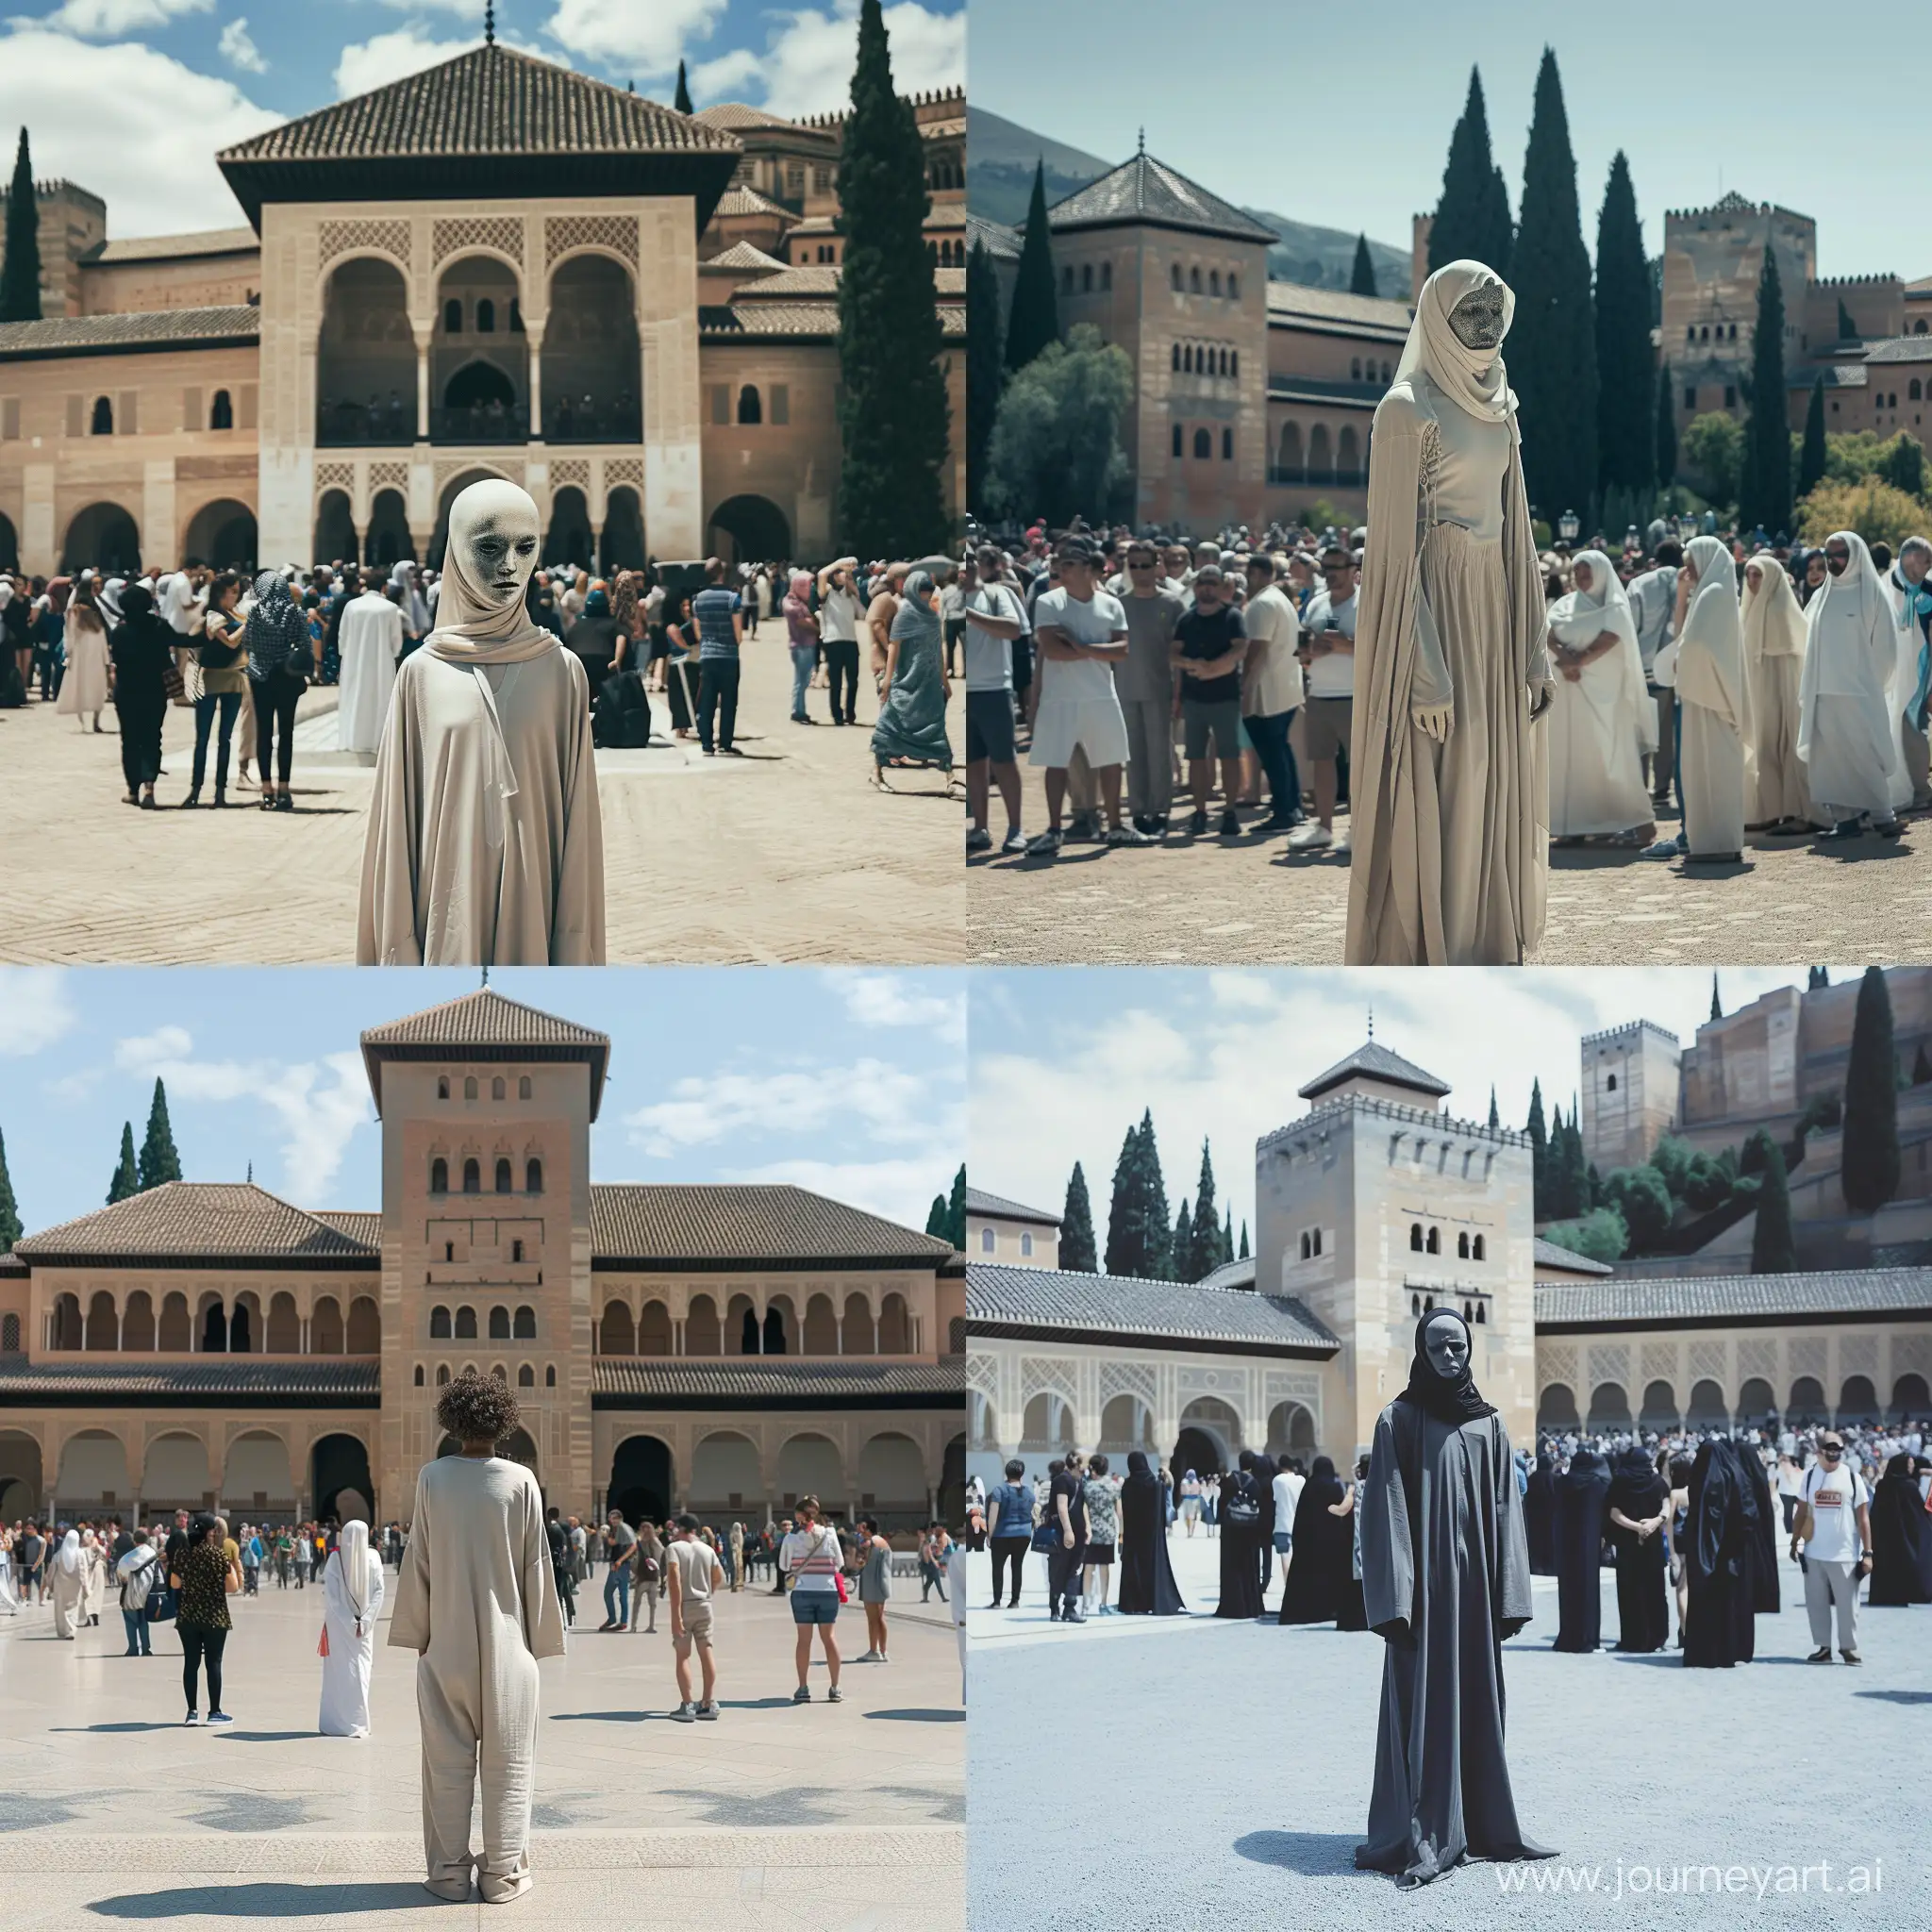 Gulf-Person-at-Alhambra-Palace-Cultural-Encounter-Amidst-Tourist-Bustle